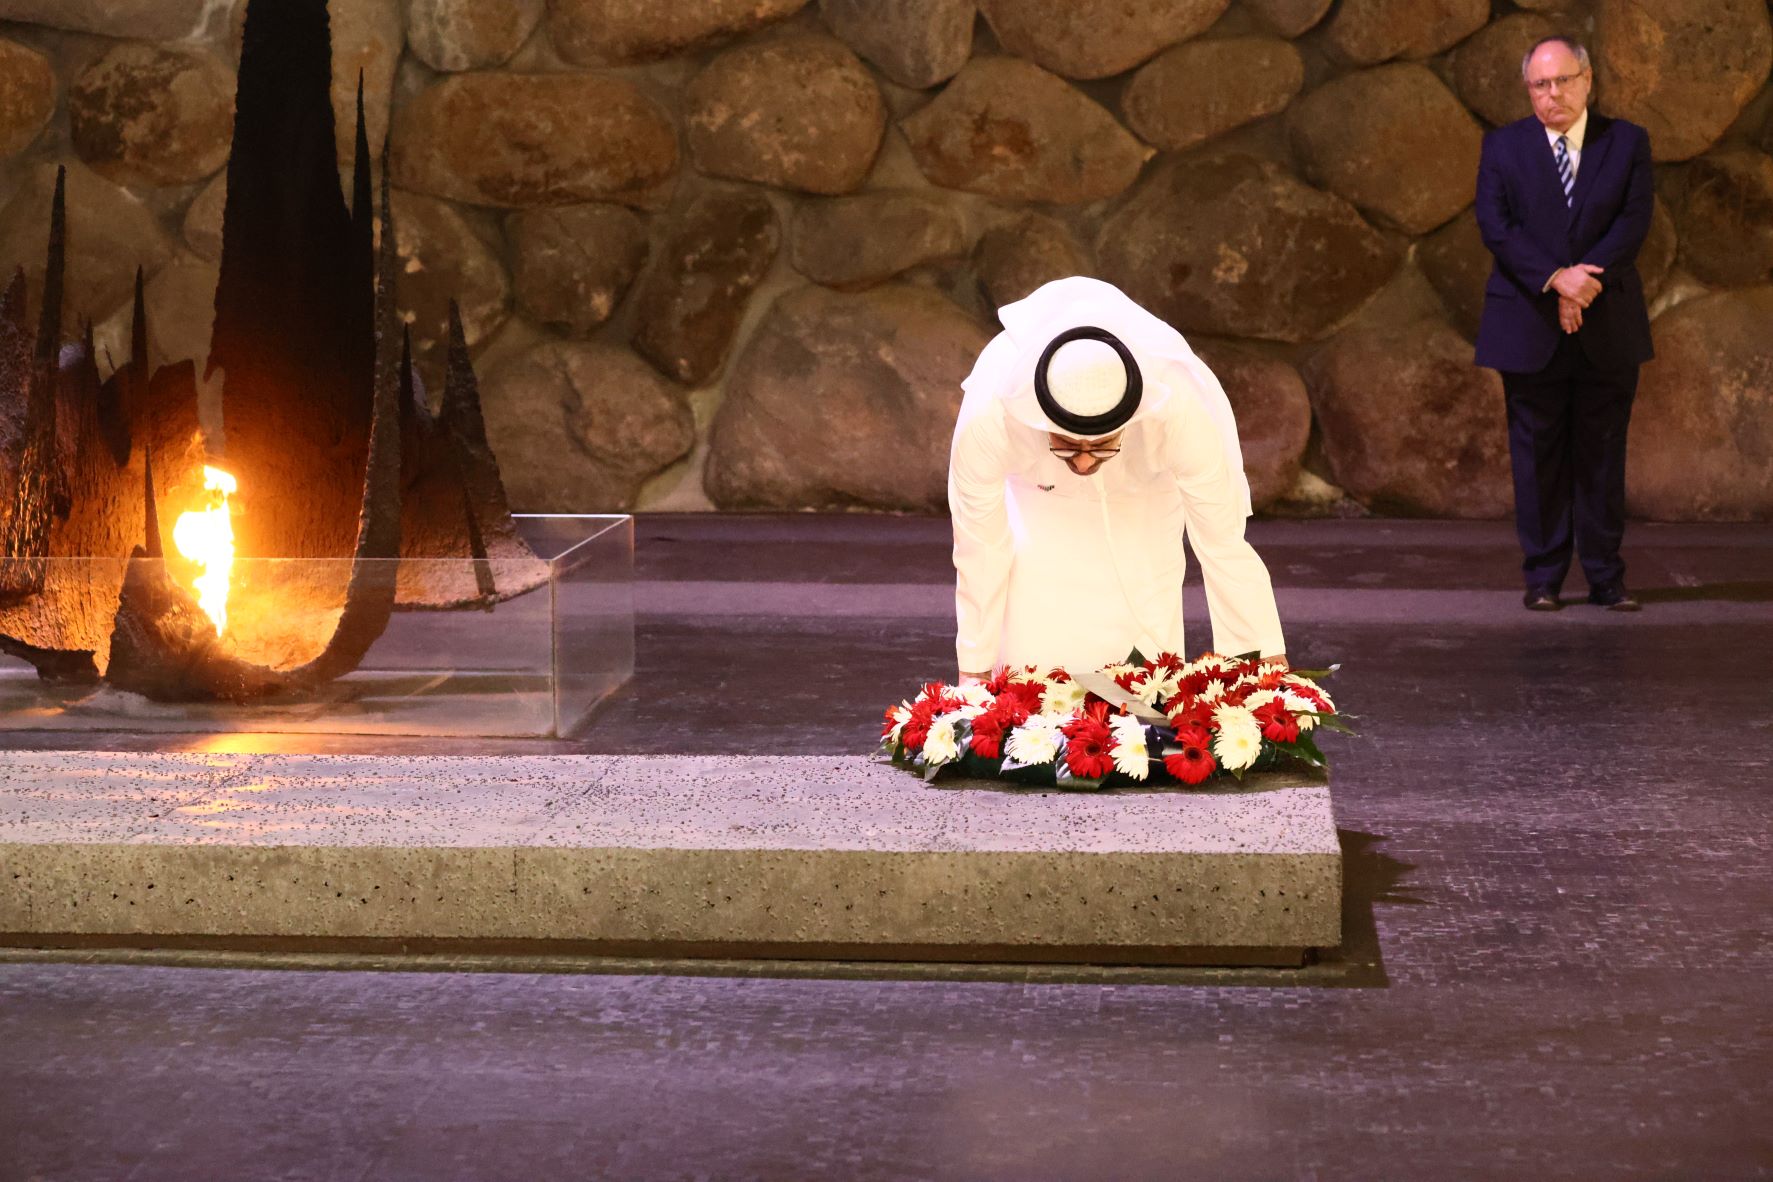 Minister Al Nahyan lays a wreath in the Hall of Remembrance at Yad Vashem during a memorial ceremony commemorating the six million Jewish men, women and children murdered during the Holocaust